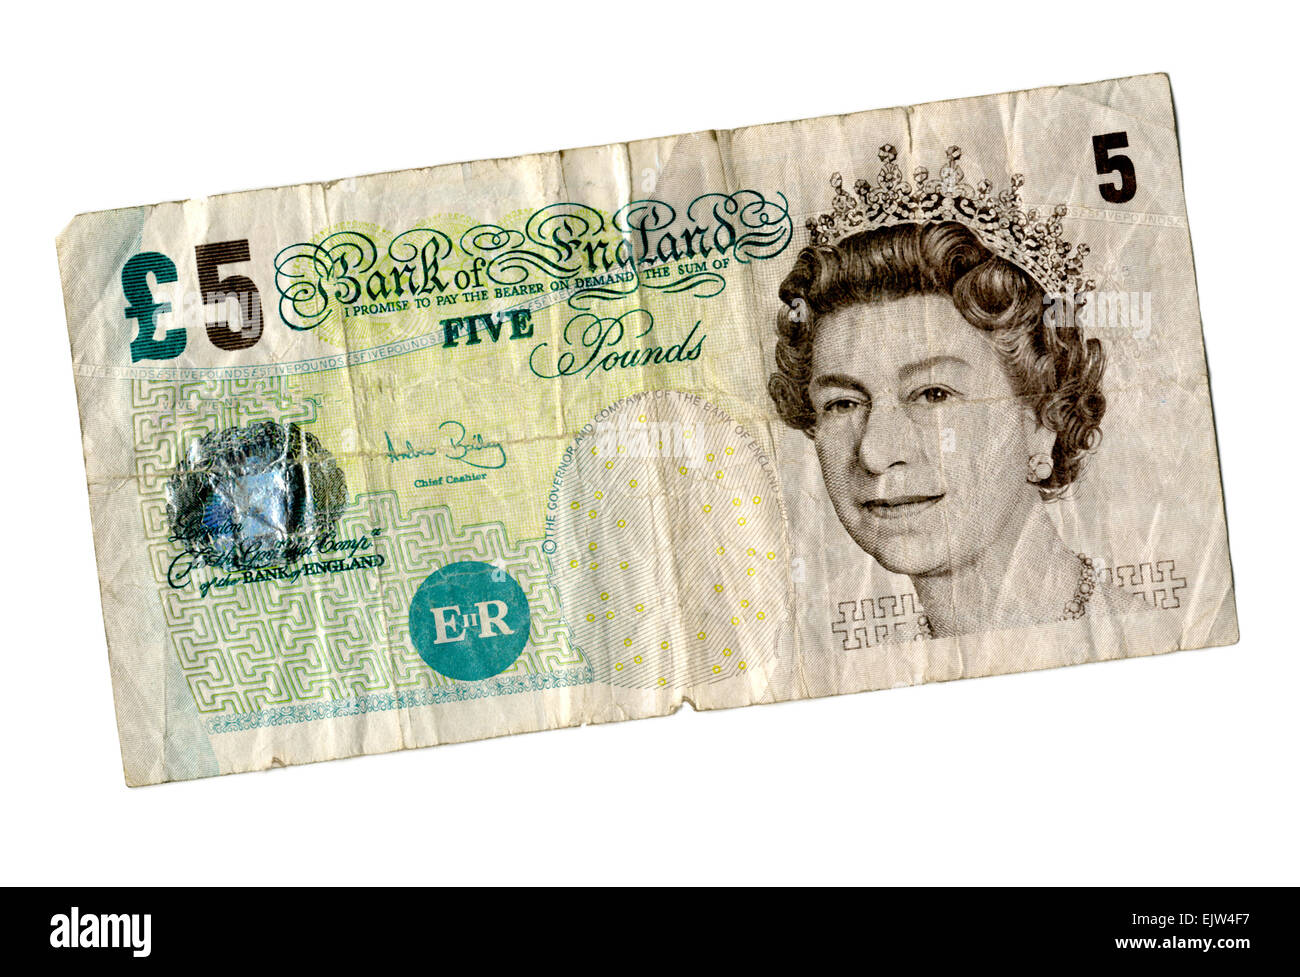 Used Old £5 Pound Note, front view Stock Photo